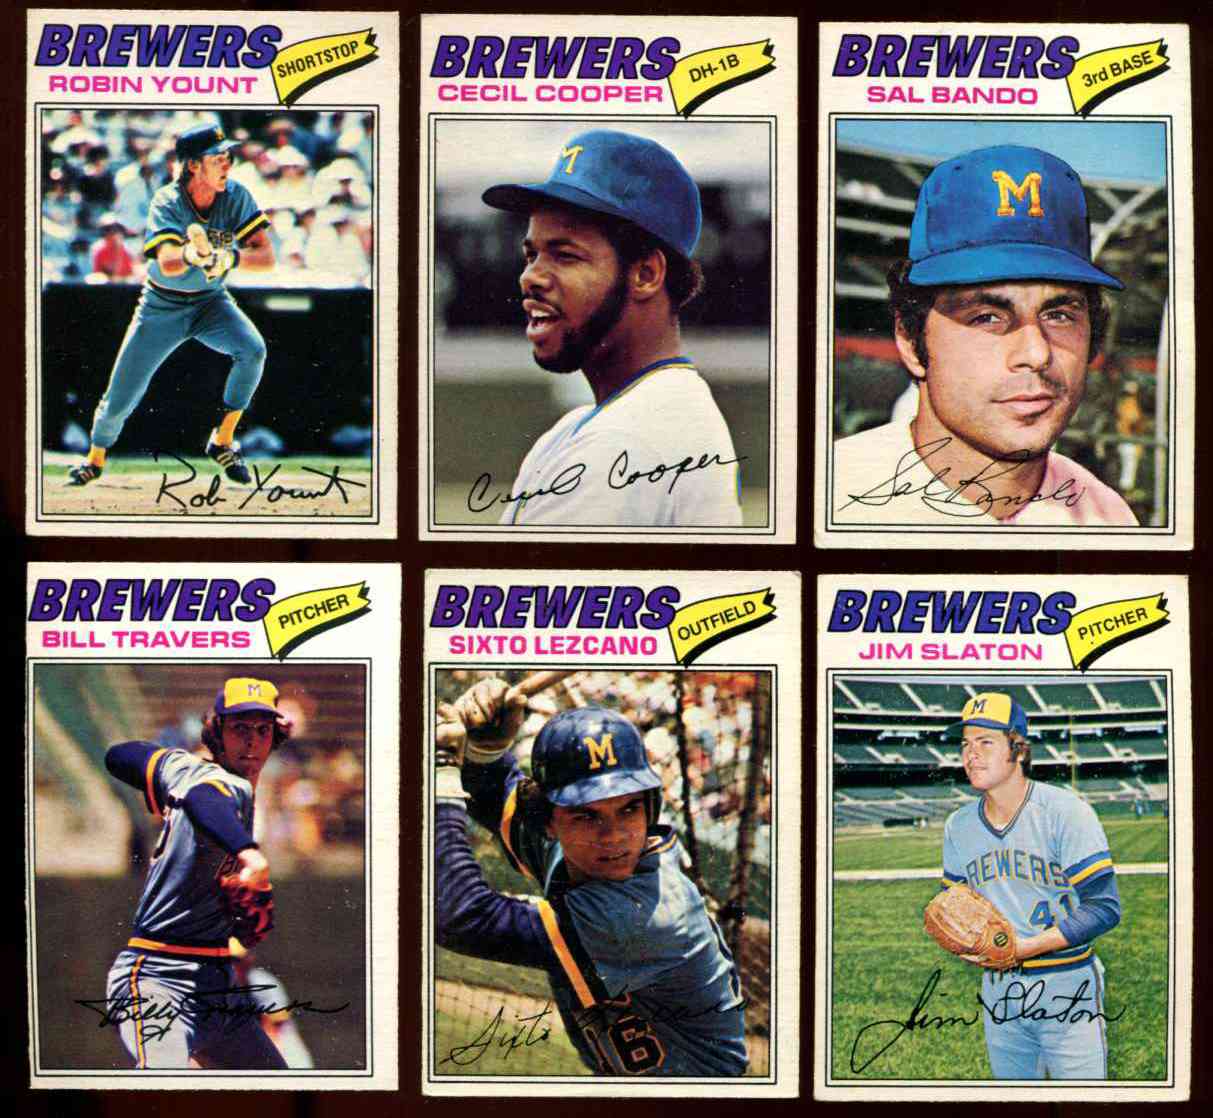  1977 O-Pee-Chee/OPC - Brewers COMPLETE TEAM SET of (6) Baseball cards value